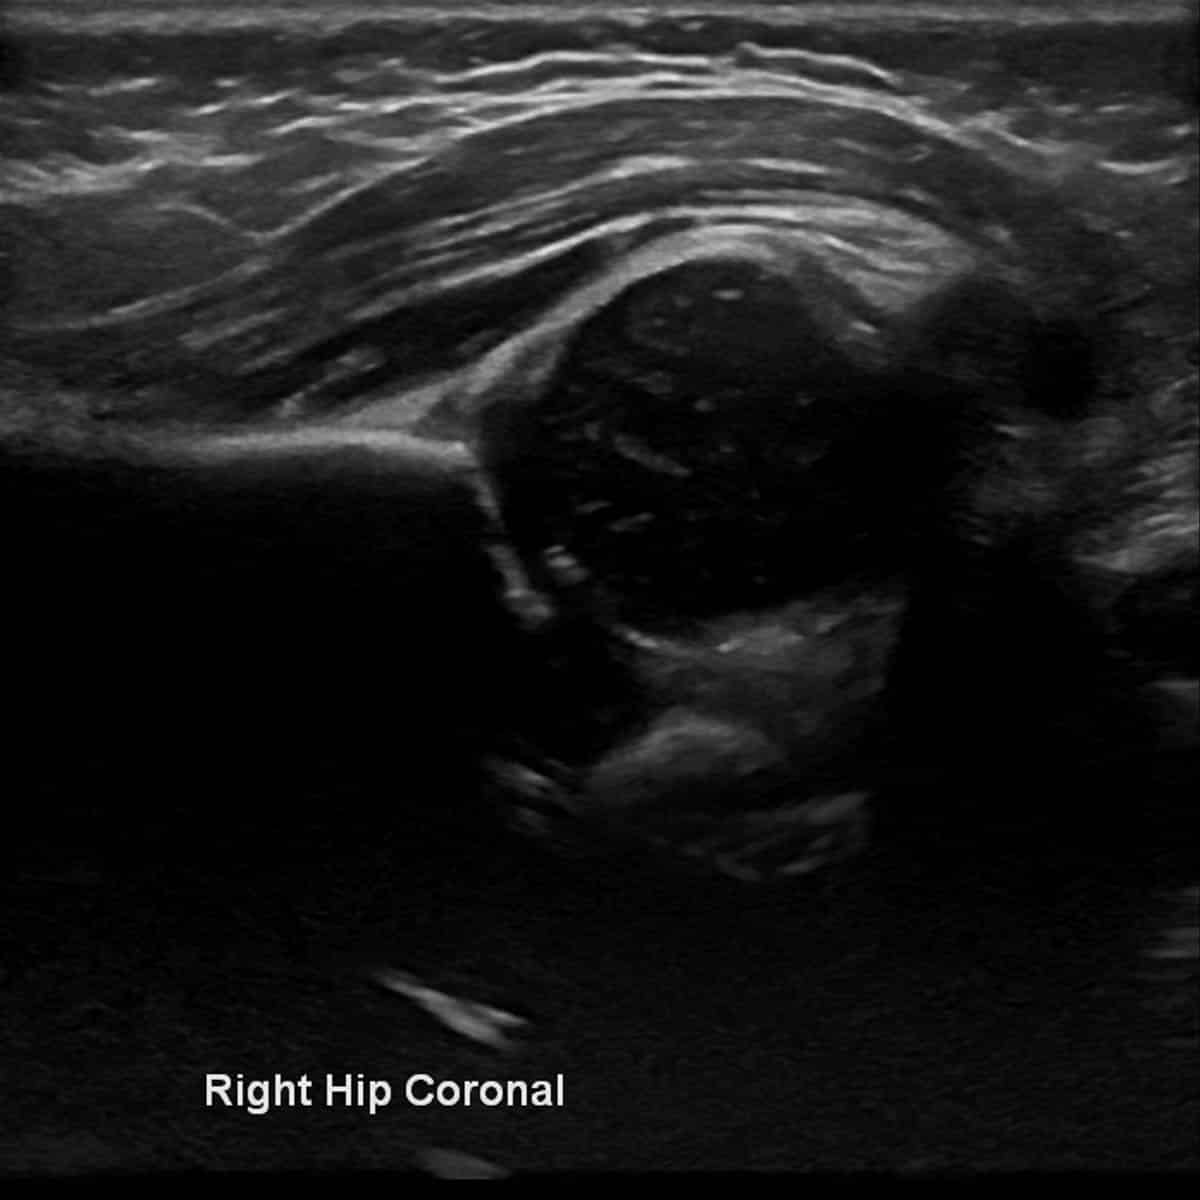 ultrasound of an infant's hip